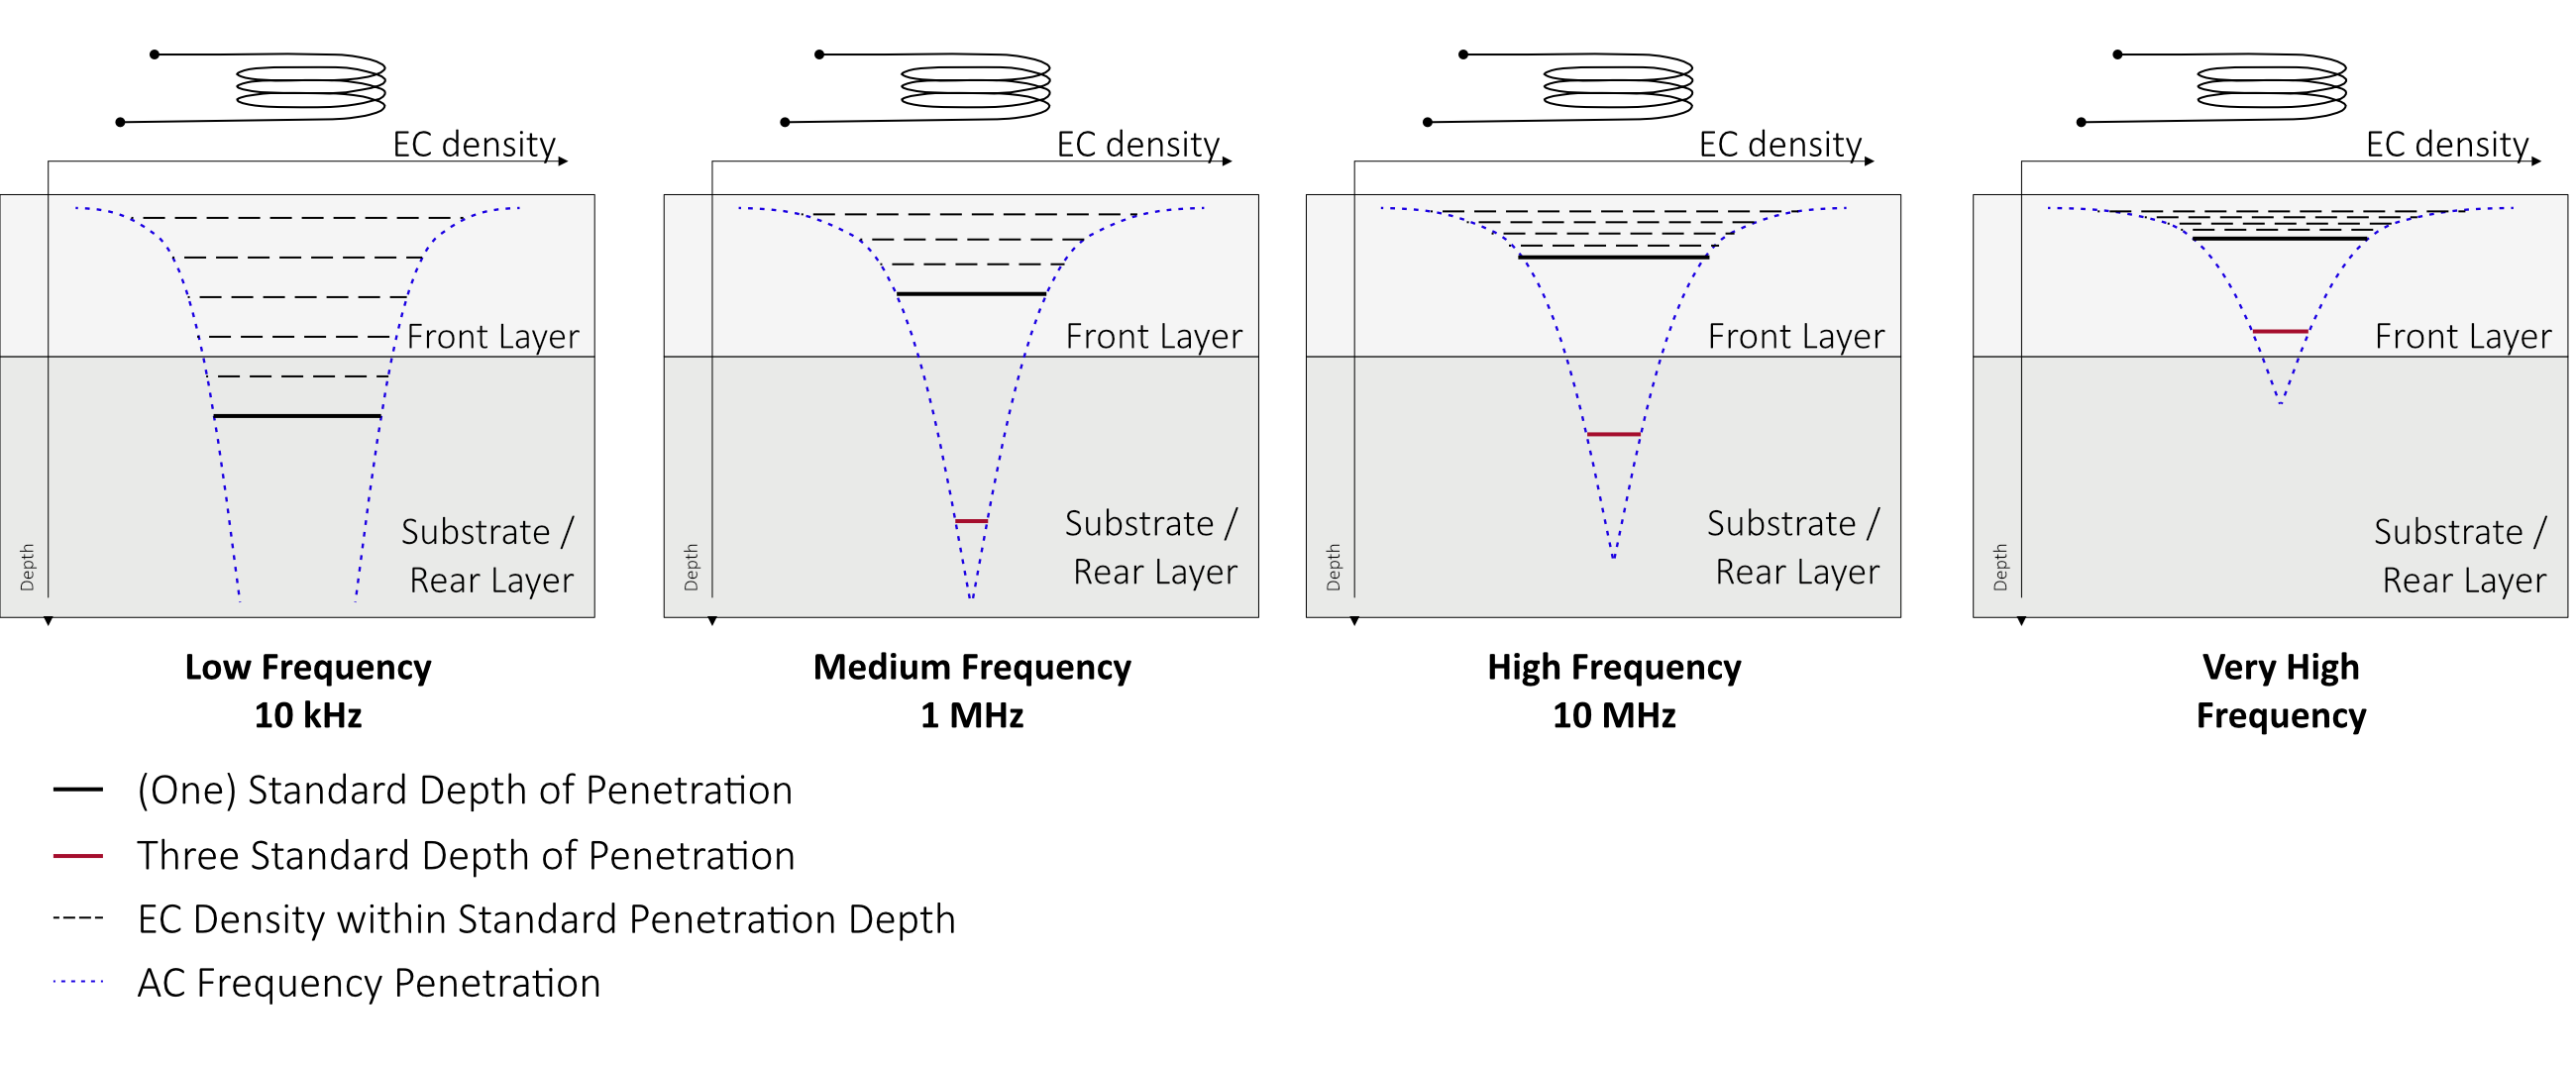 Visualization of the penetration depth of an eddy current signal depending on the eddy current frequency to better understand resistivity measurement by eddy current technology